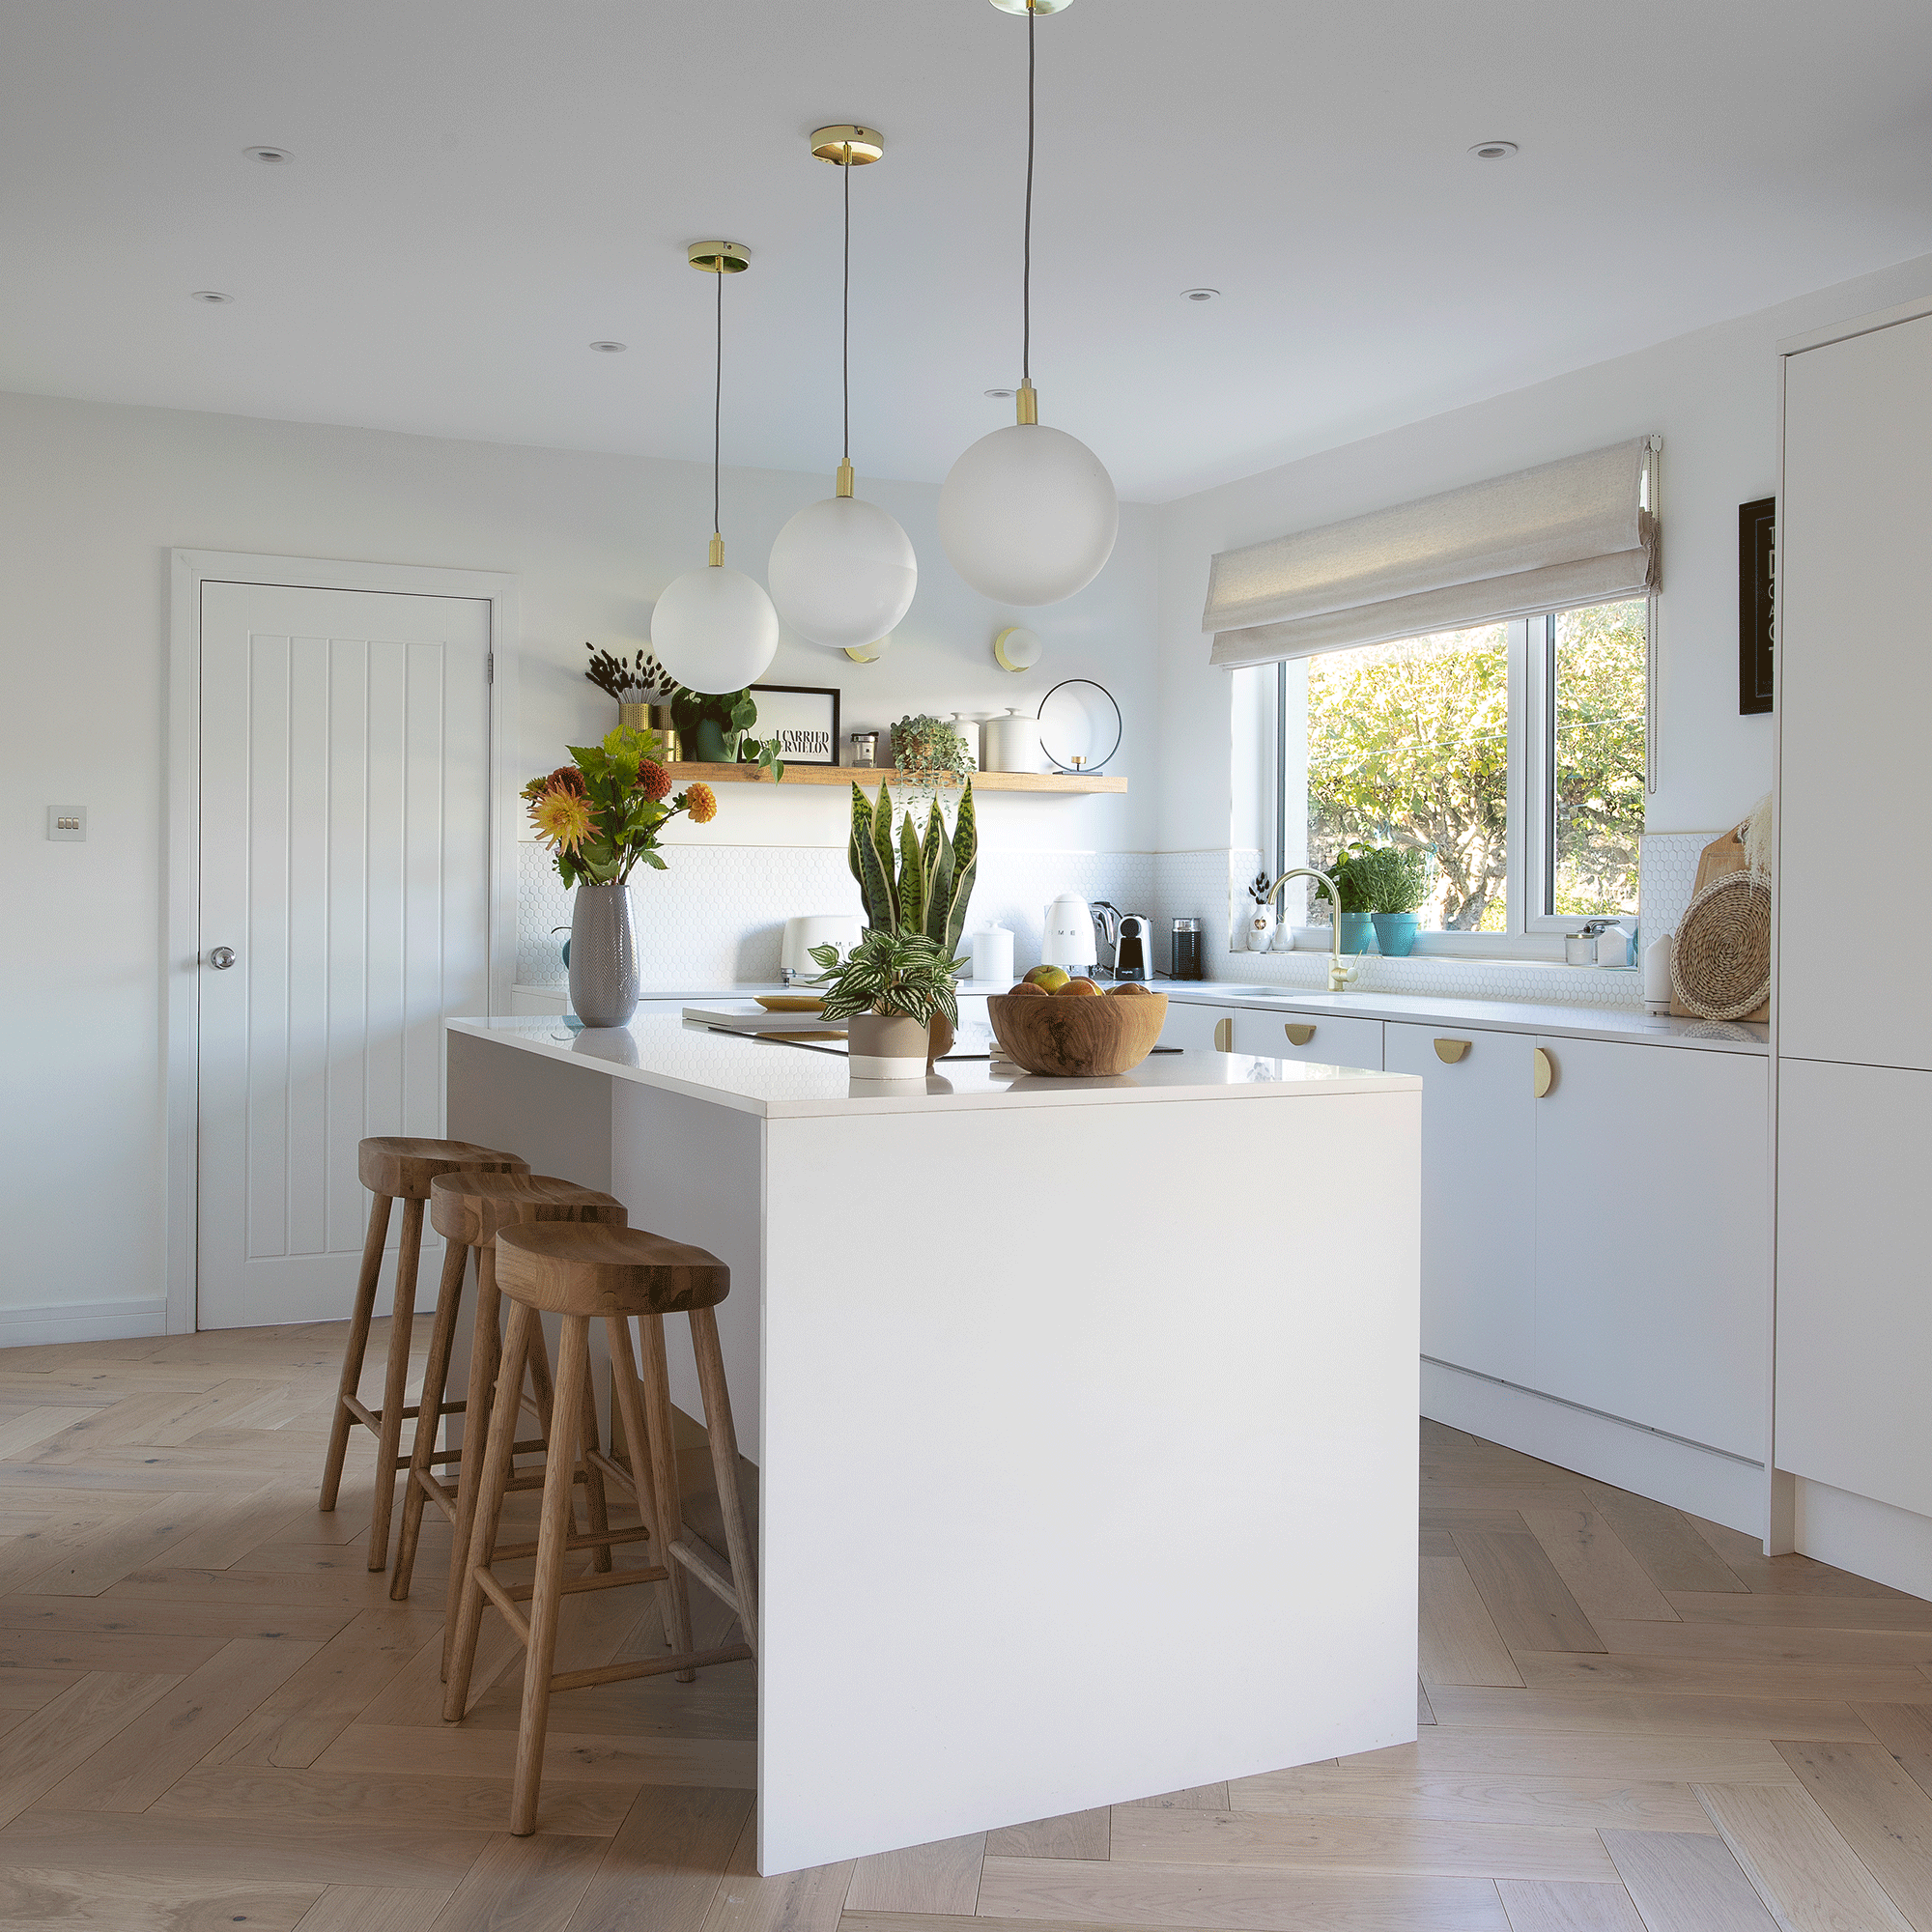 White kitchen with island and wooden stools